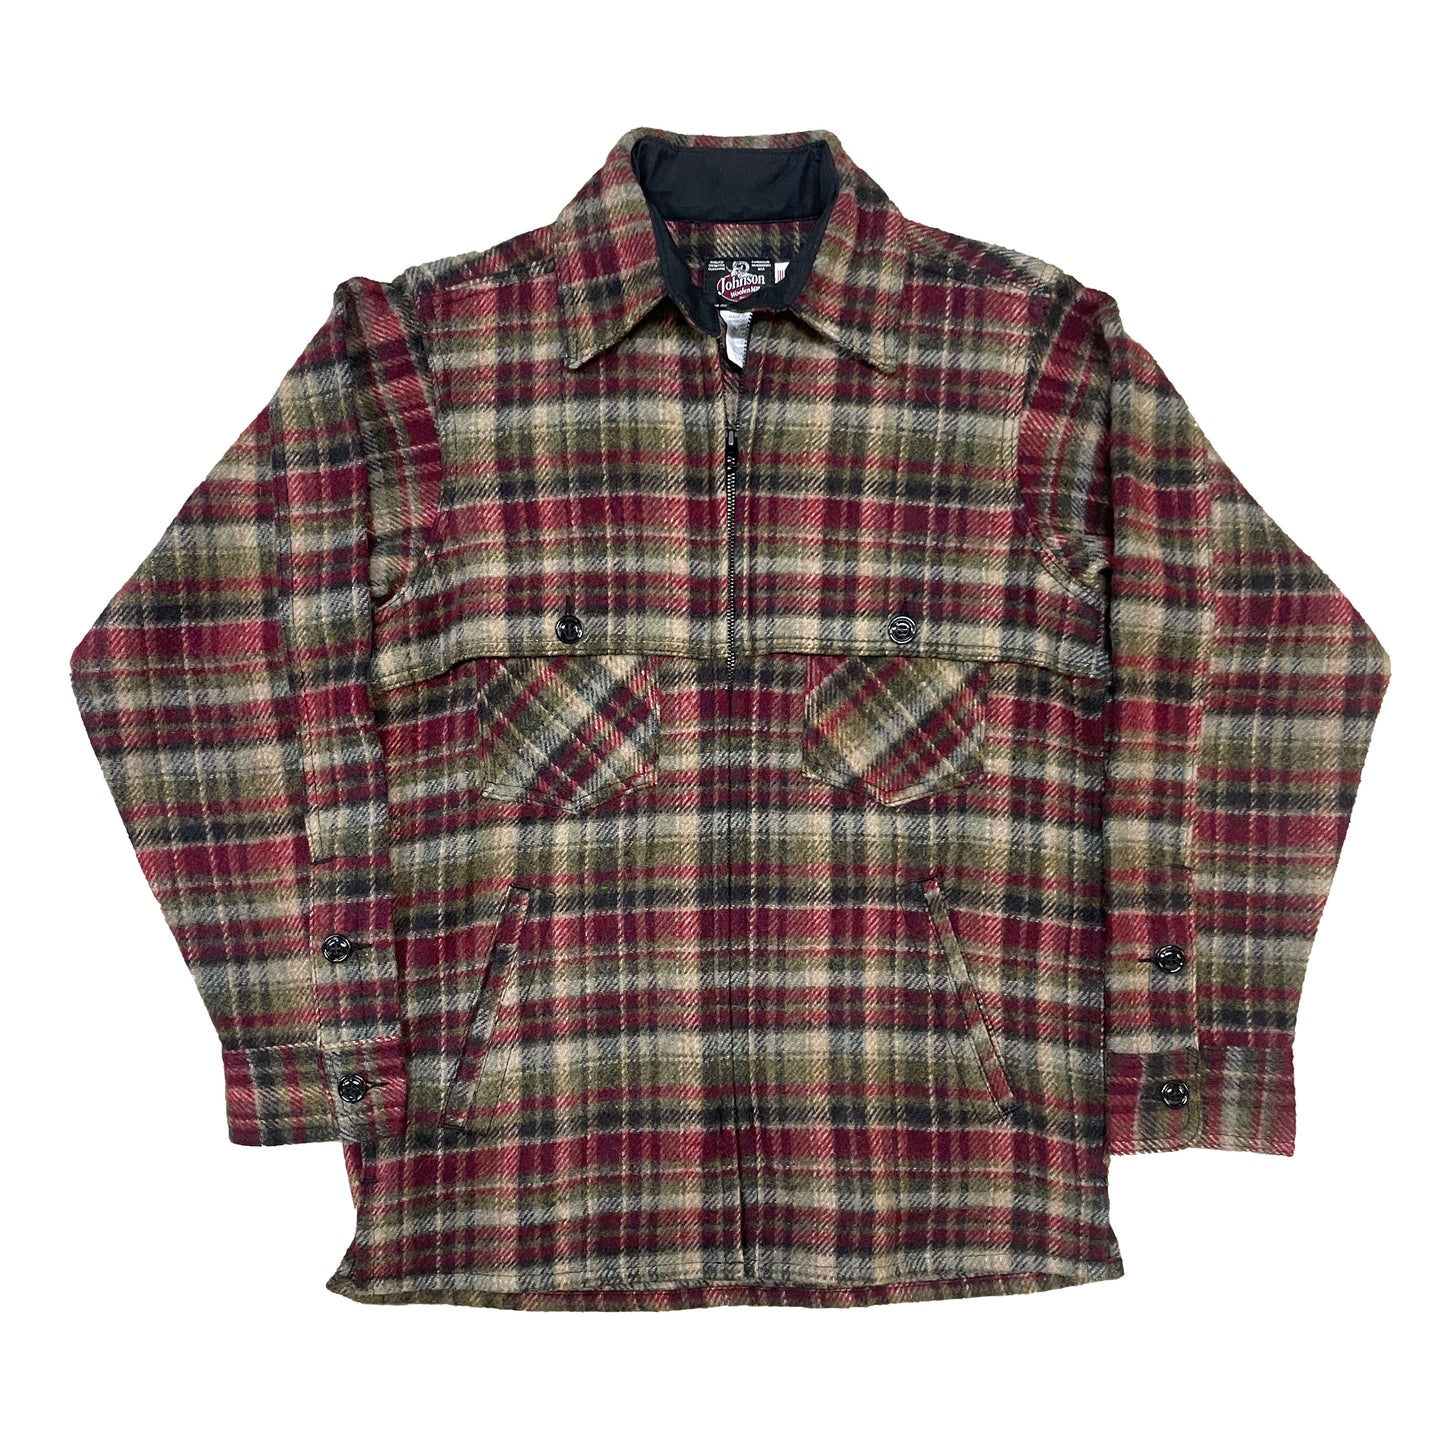 Wool jac shirt with full zipper, two chest pockets and two lower slash pockets. Shown in burgundy, olive and beige plaid